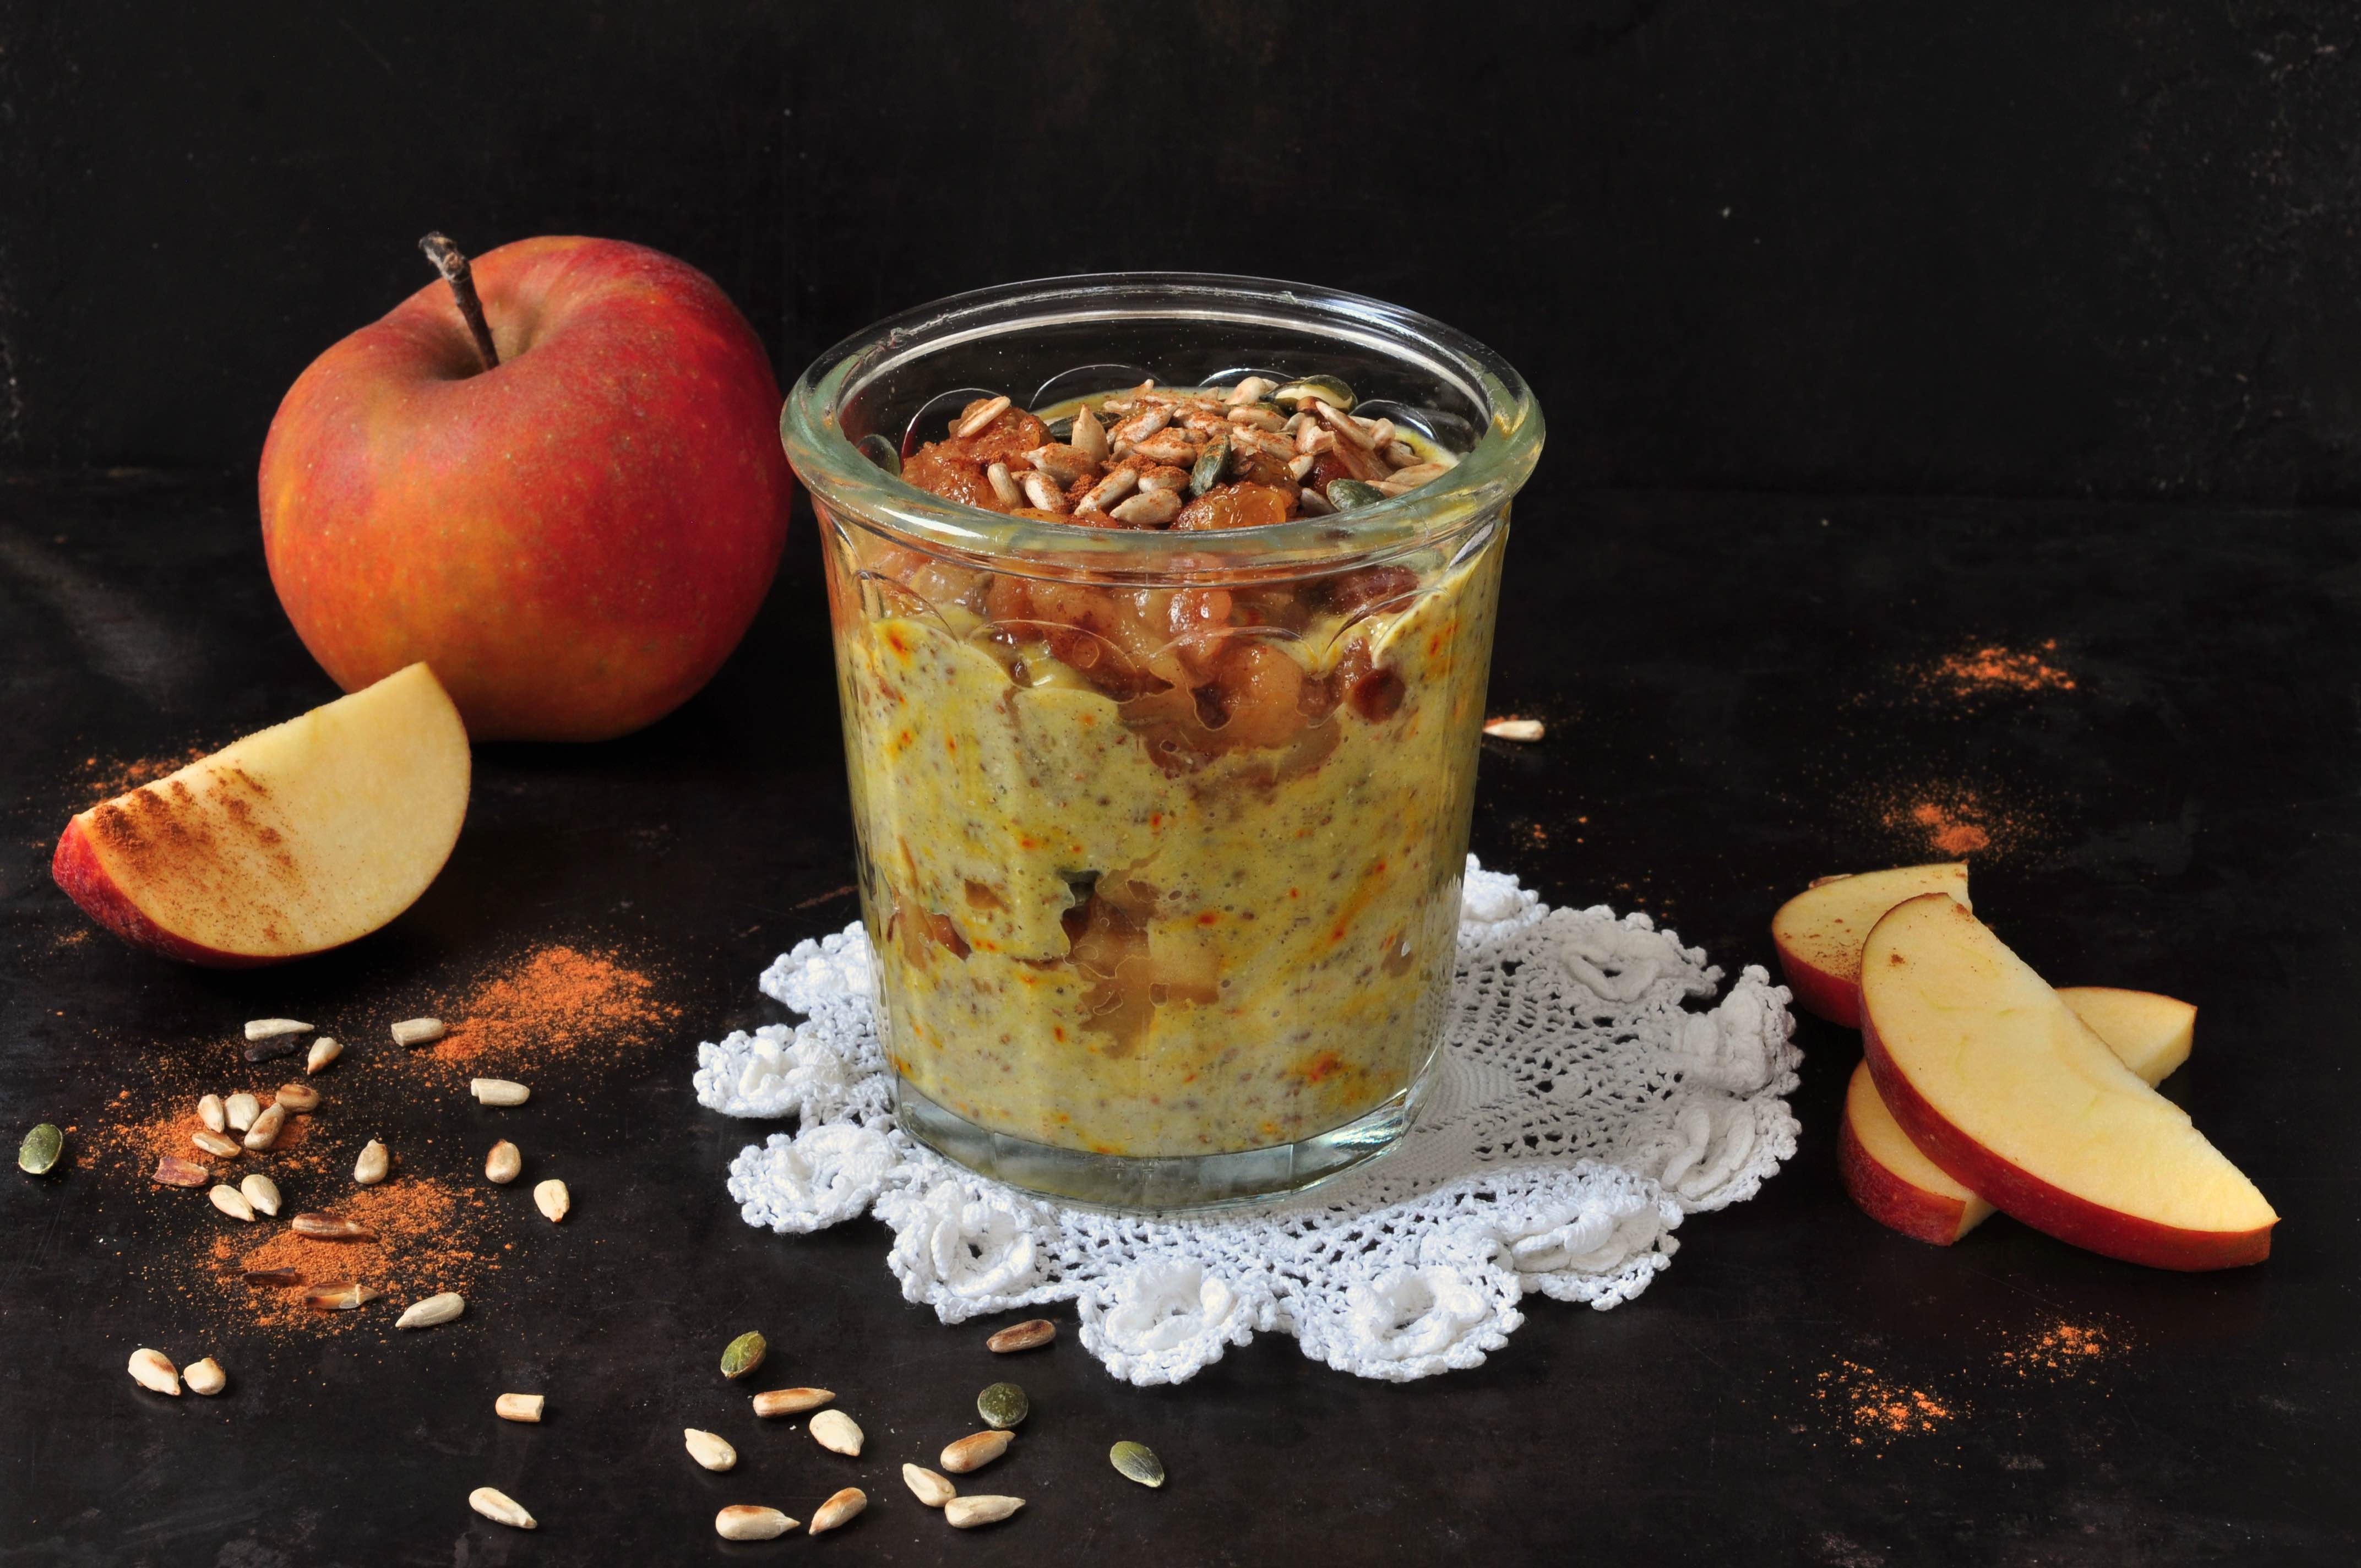 Chiapudding_with_saffron_and_warm_apples